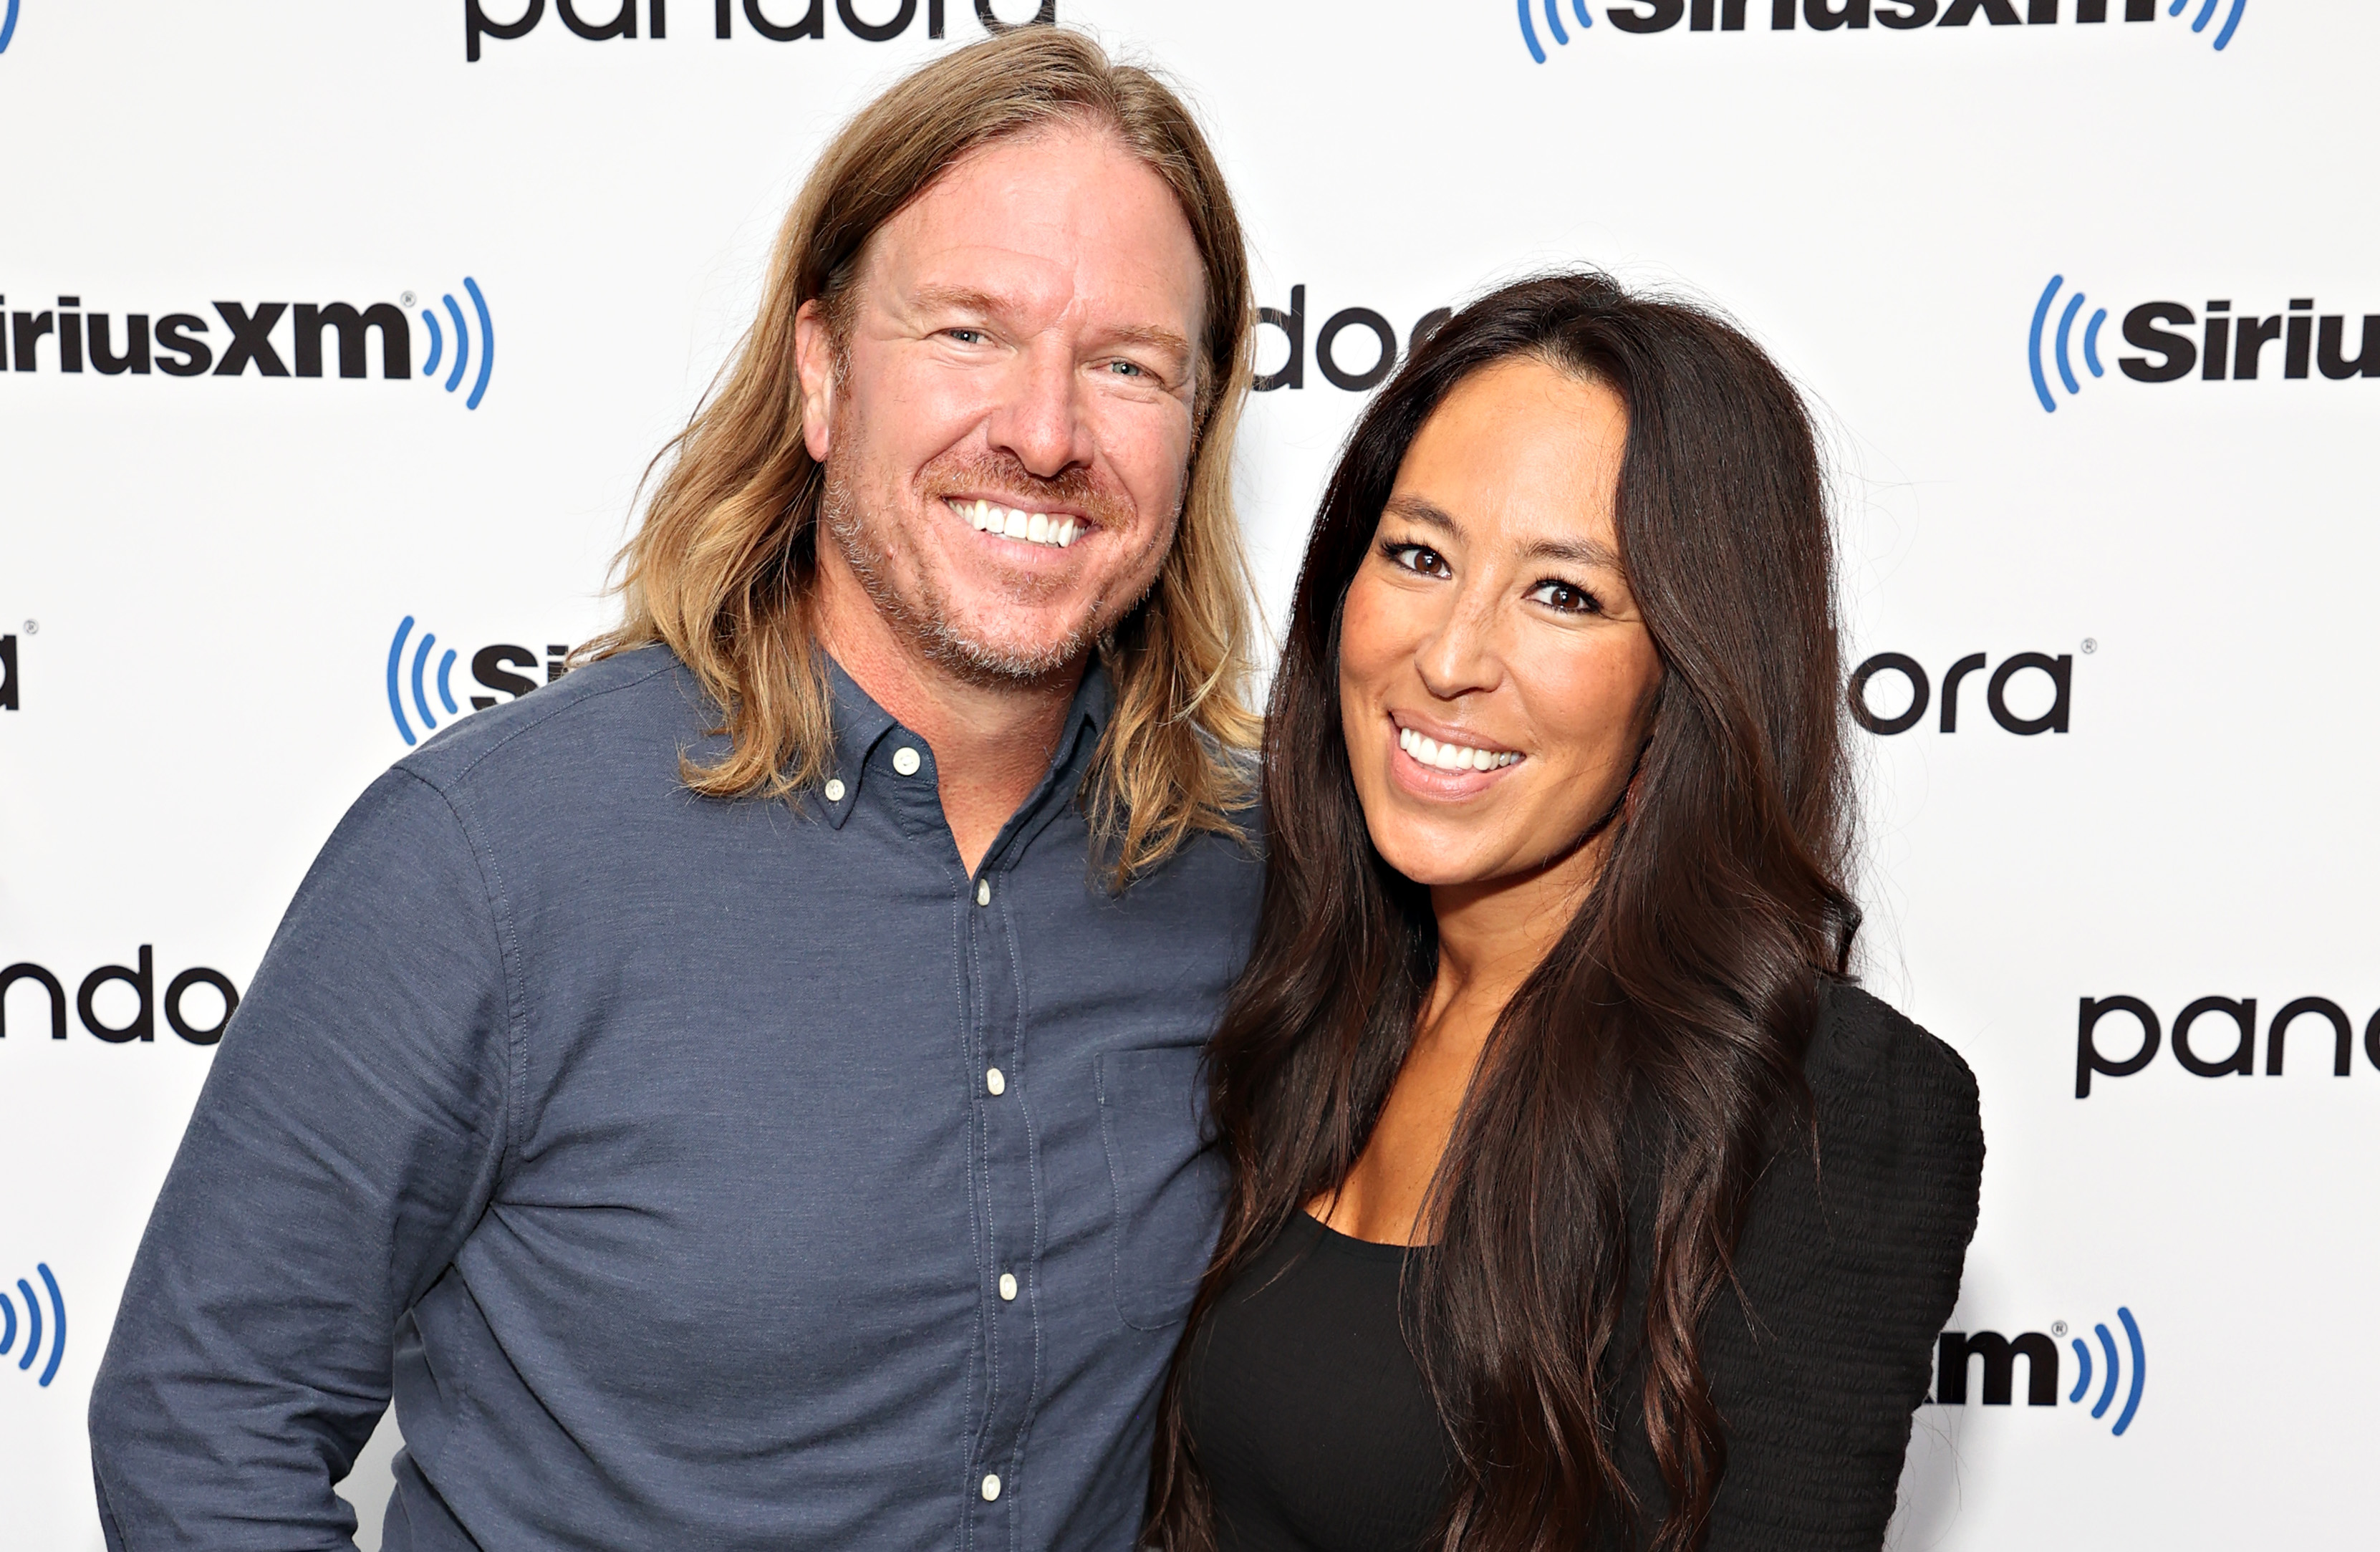 Chip and Joanna Gaines smiling during an appearance on SiriusXM